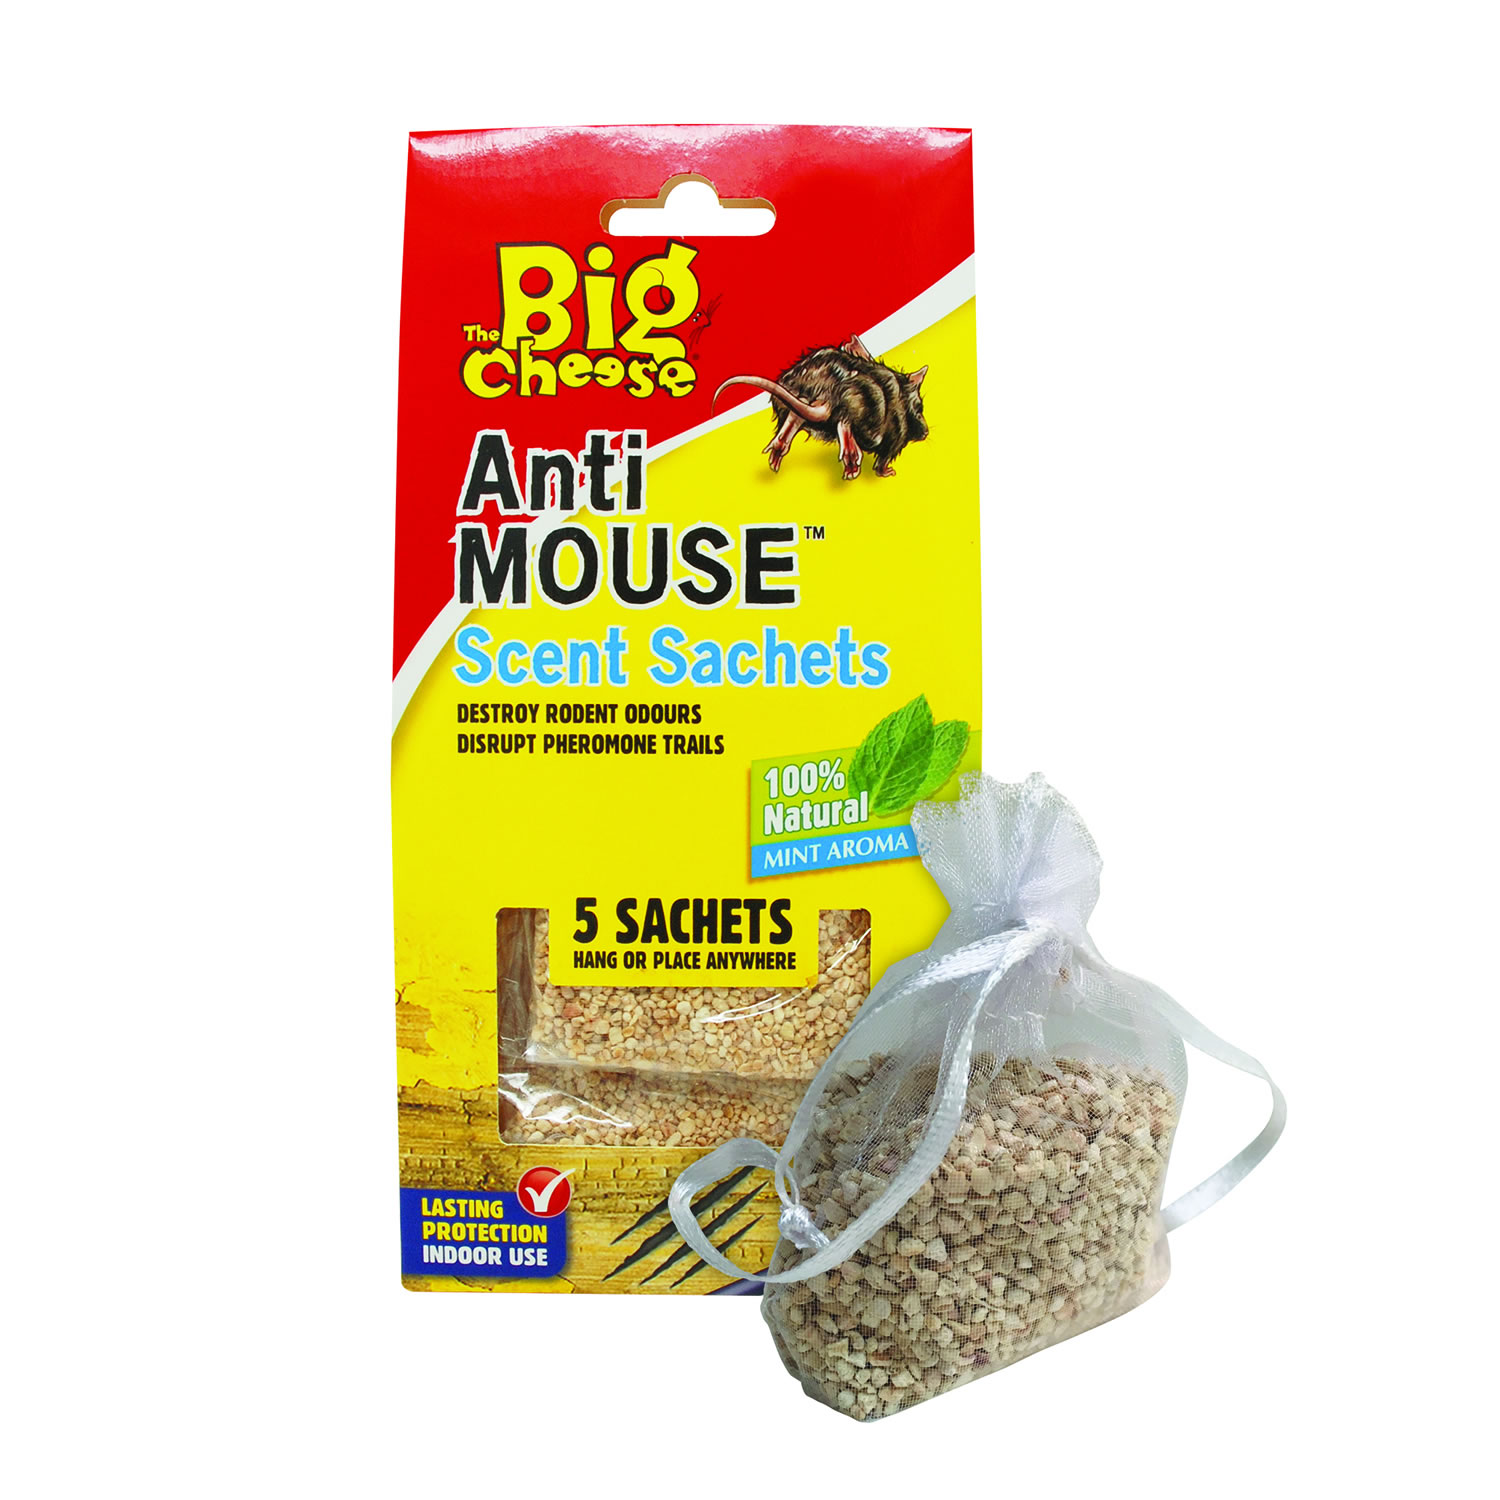 THE BIG CHEESE ANTI MOUSE SCENT SACHETS 5 PACK